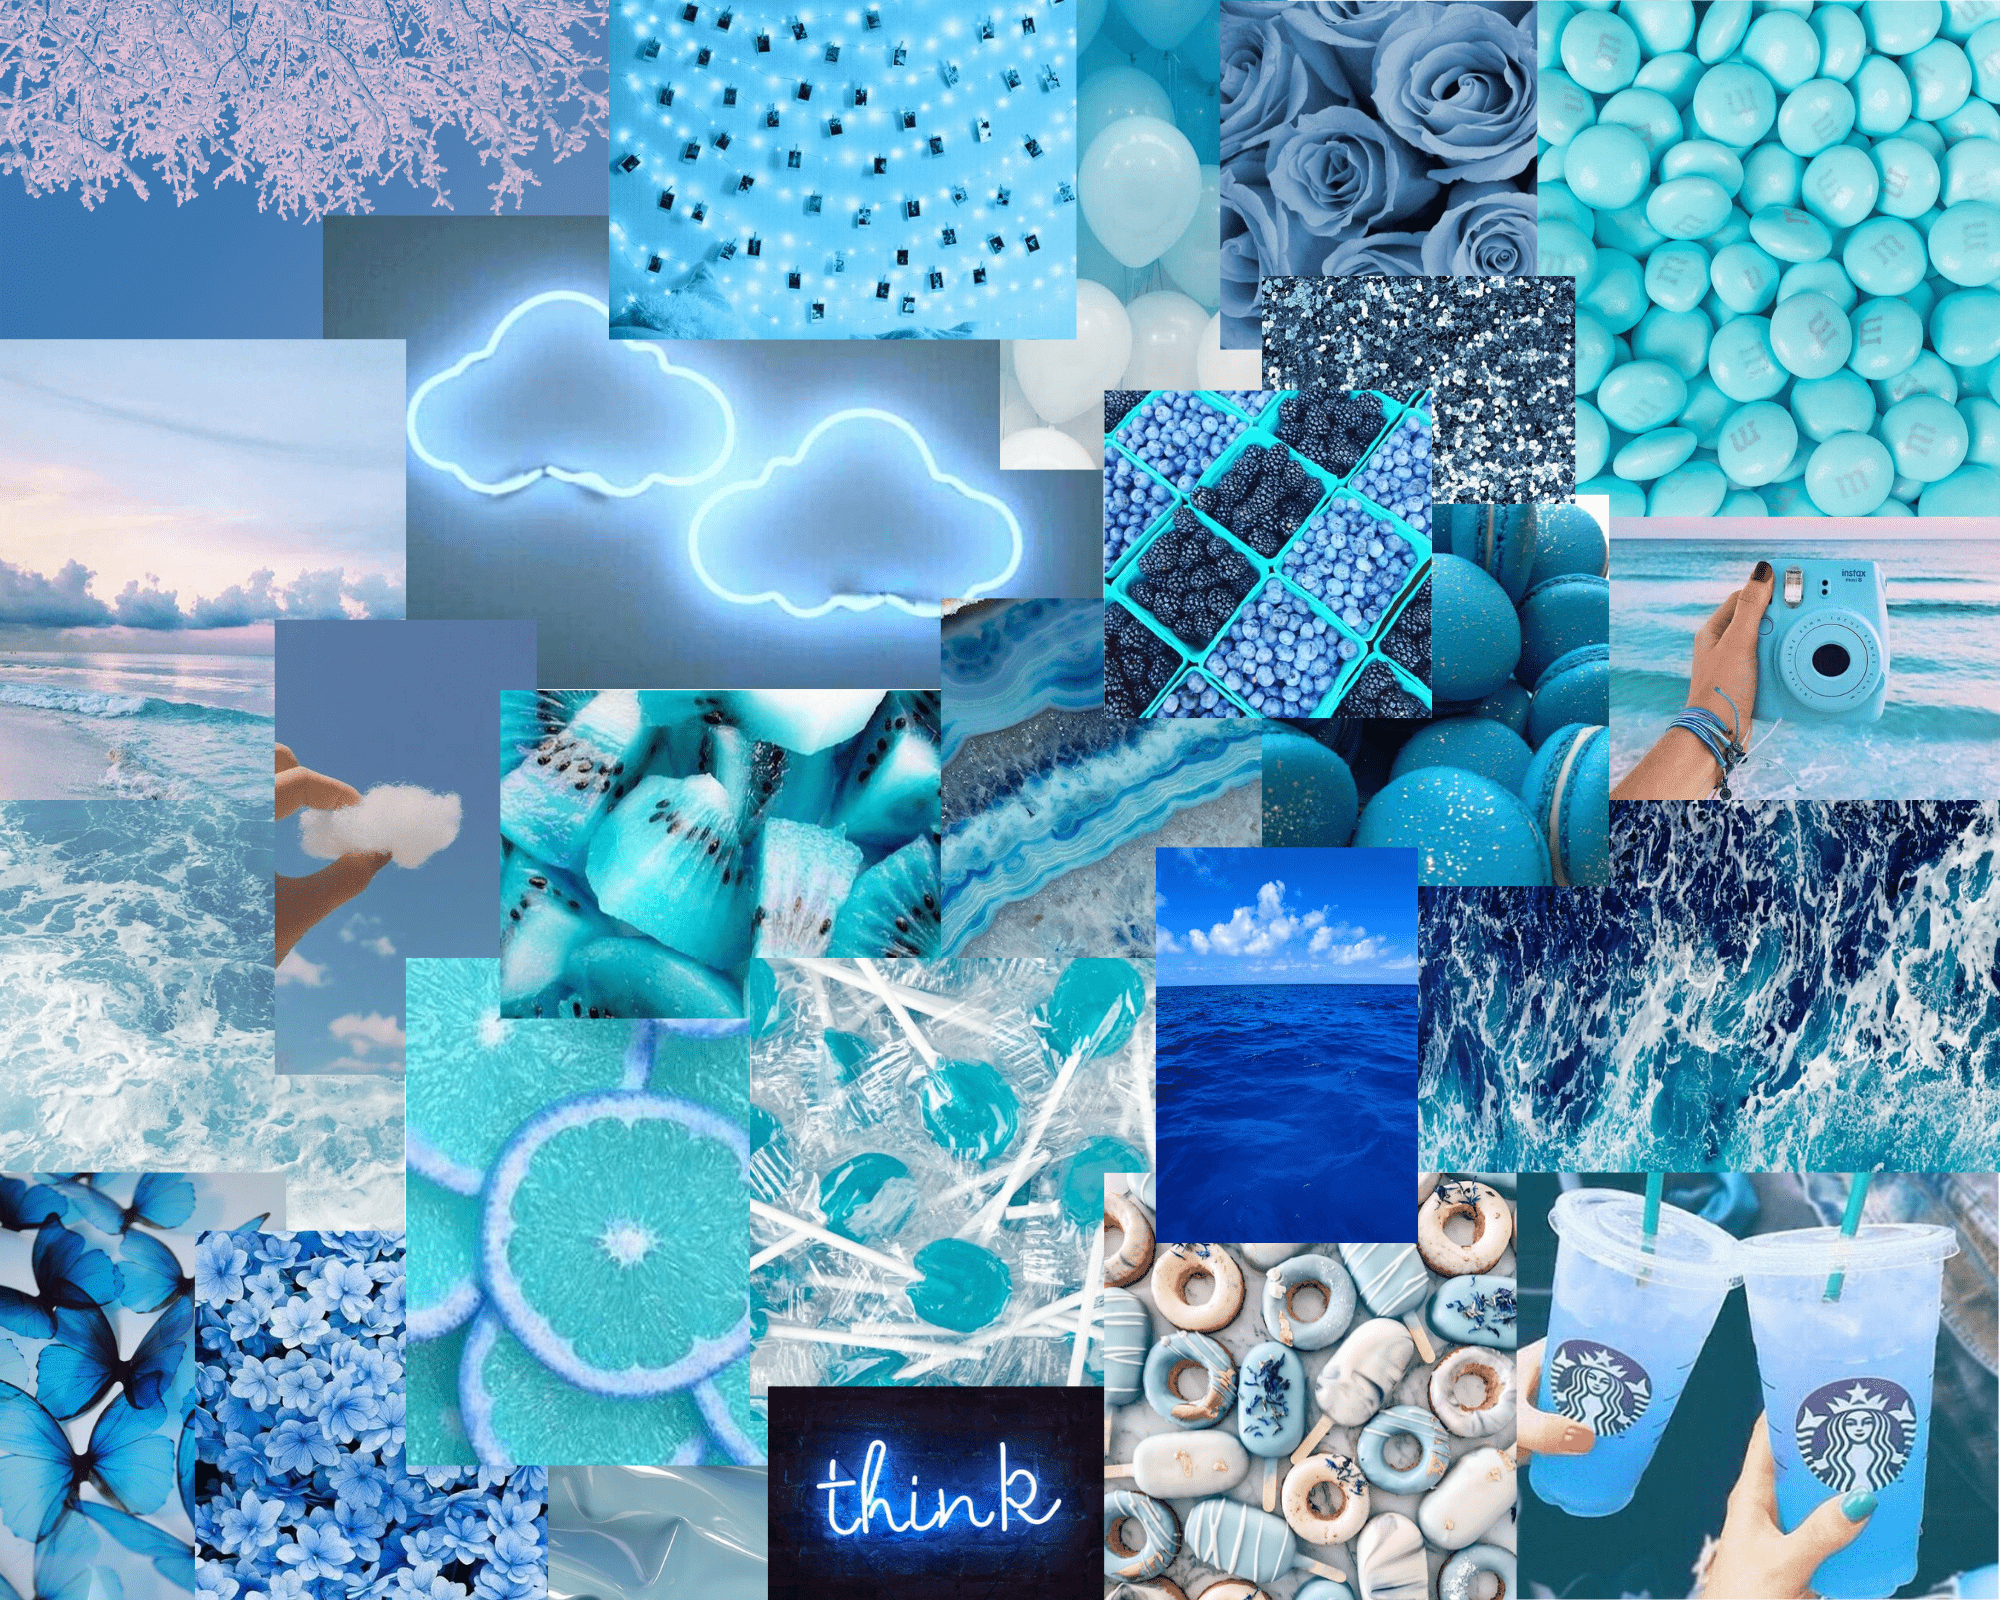 A collage of blue and white images - Blue, pastel blue